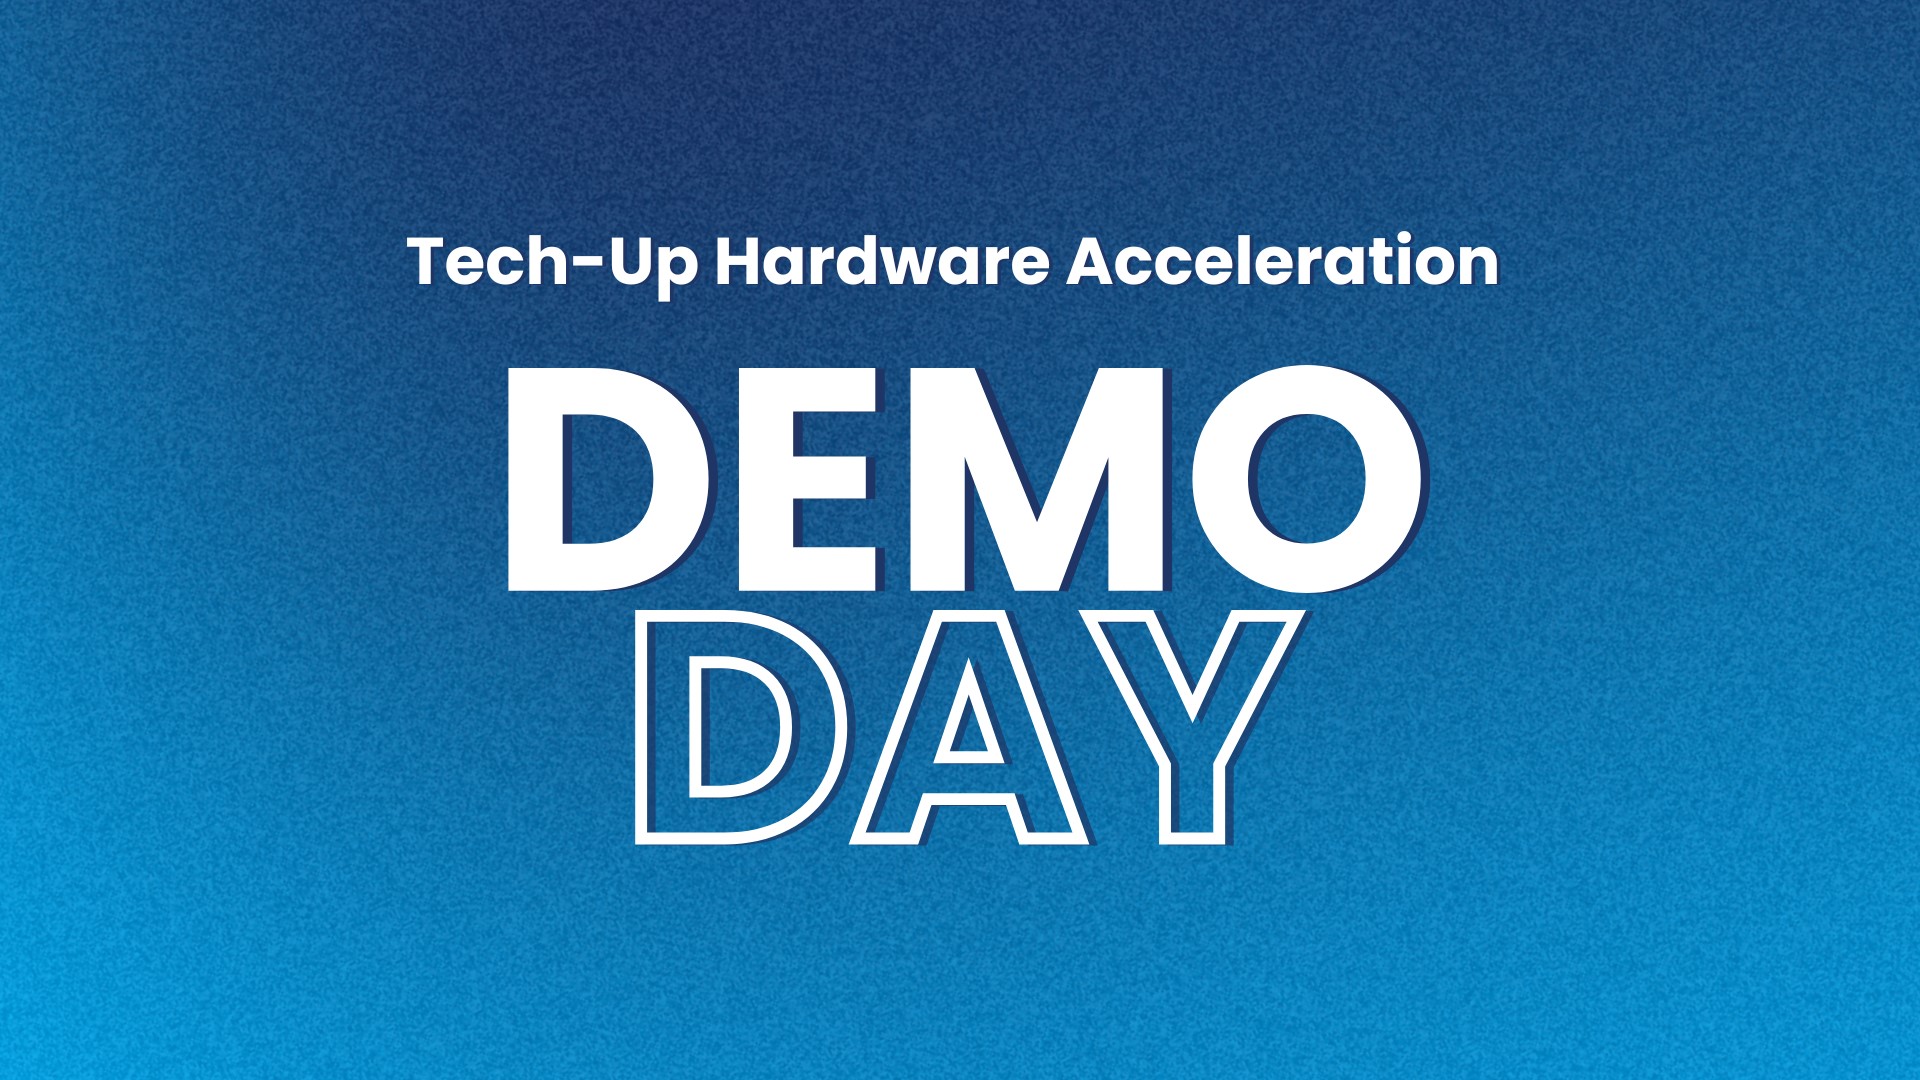 Tech-Up Hardware Acceleration - Demo Day